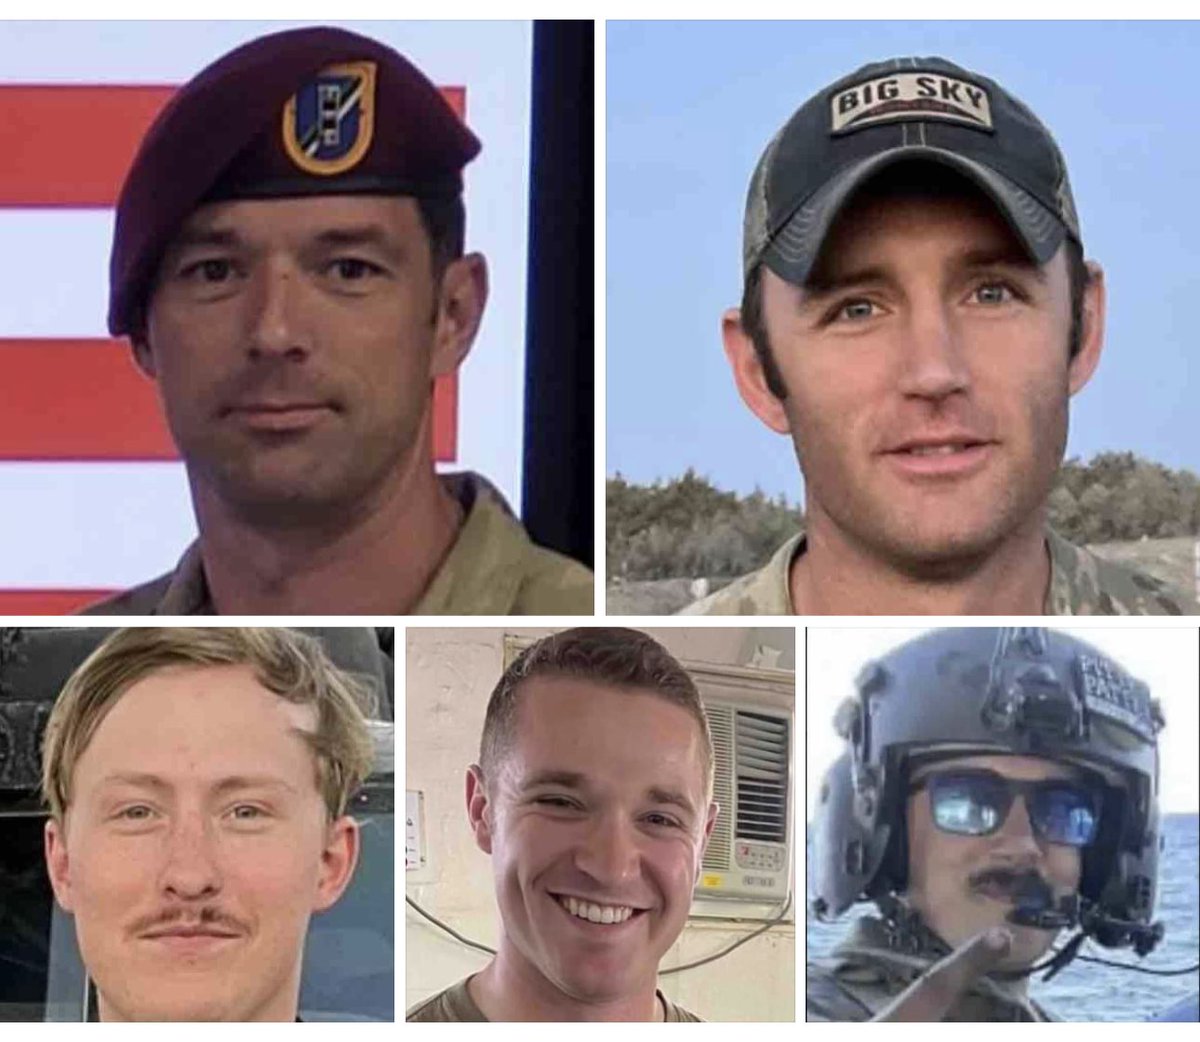 Five Green Berets killed in a helicopter crash in the ME over the weekend. At least the USASOC facebook page had the decency not to spread the “training accident” lie. And for what? Not a gottdam thing. Fuck anyone who supports sending our troops to die for these bullshit wars.